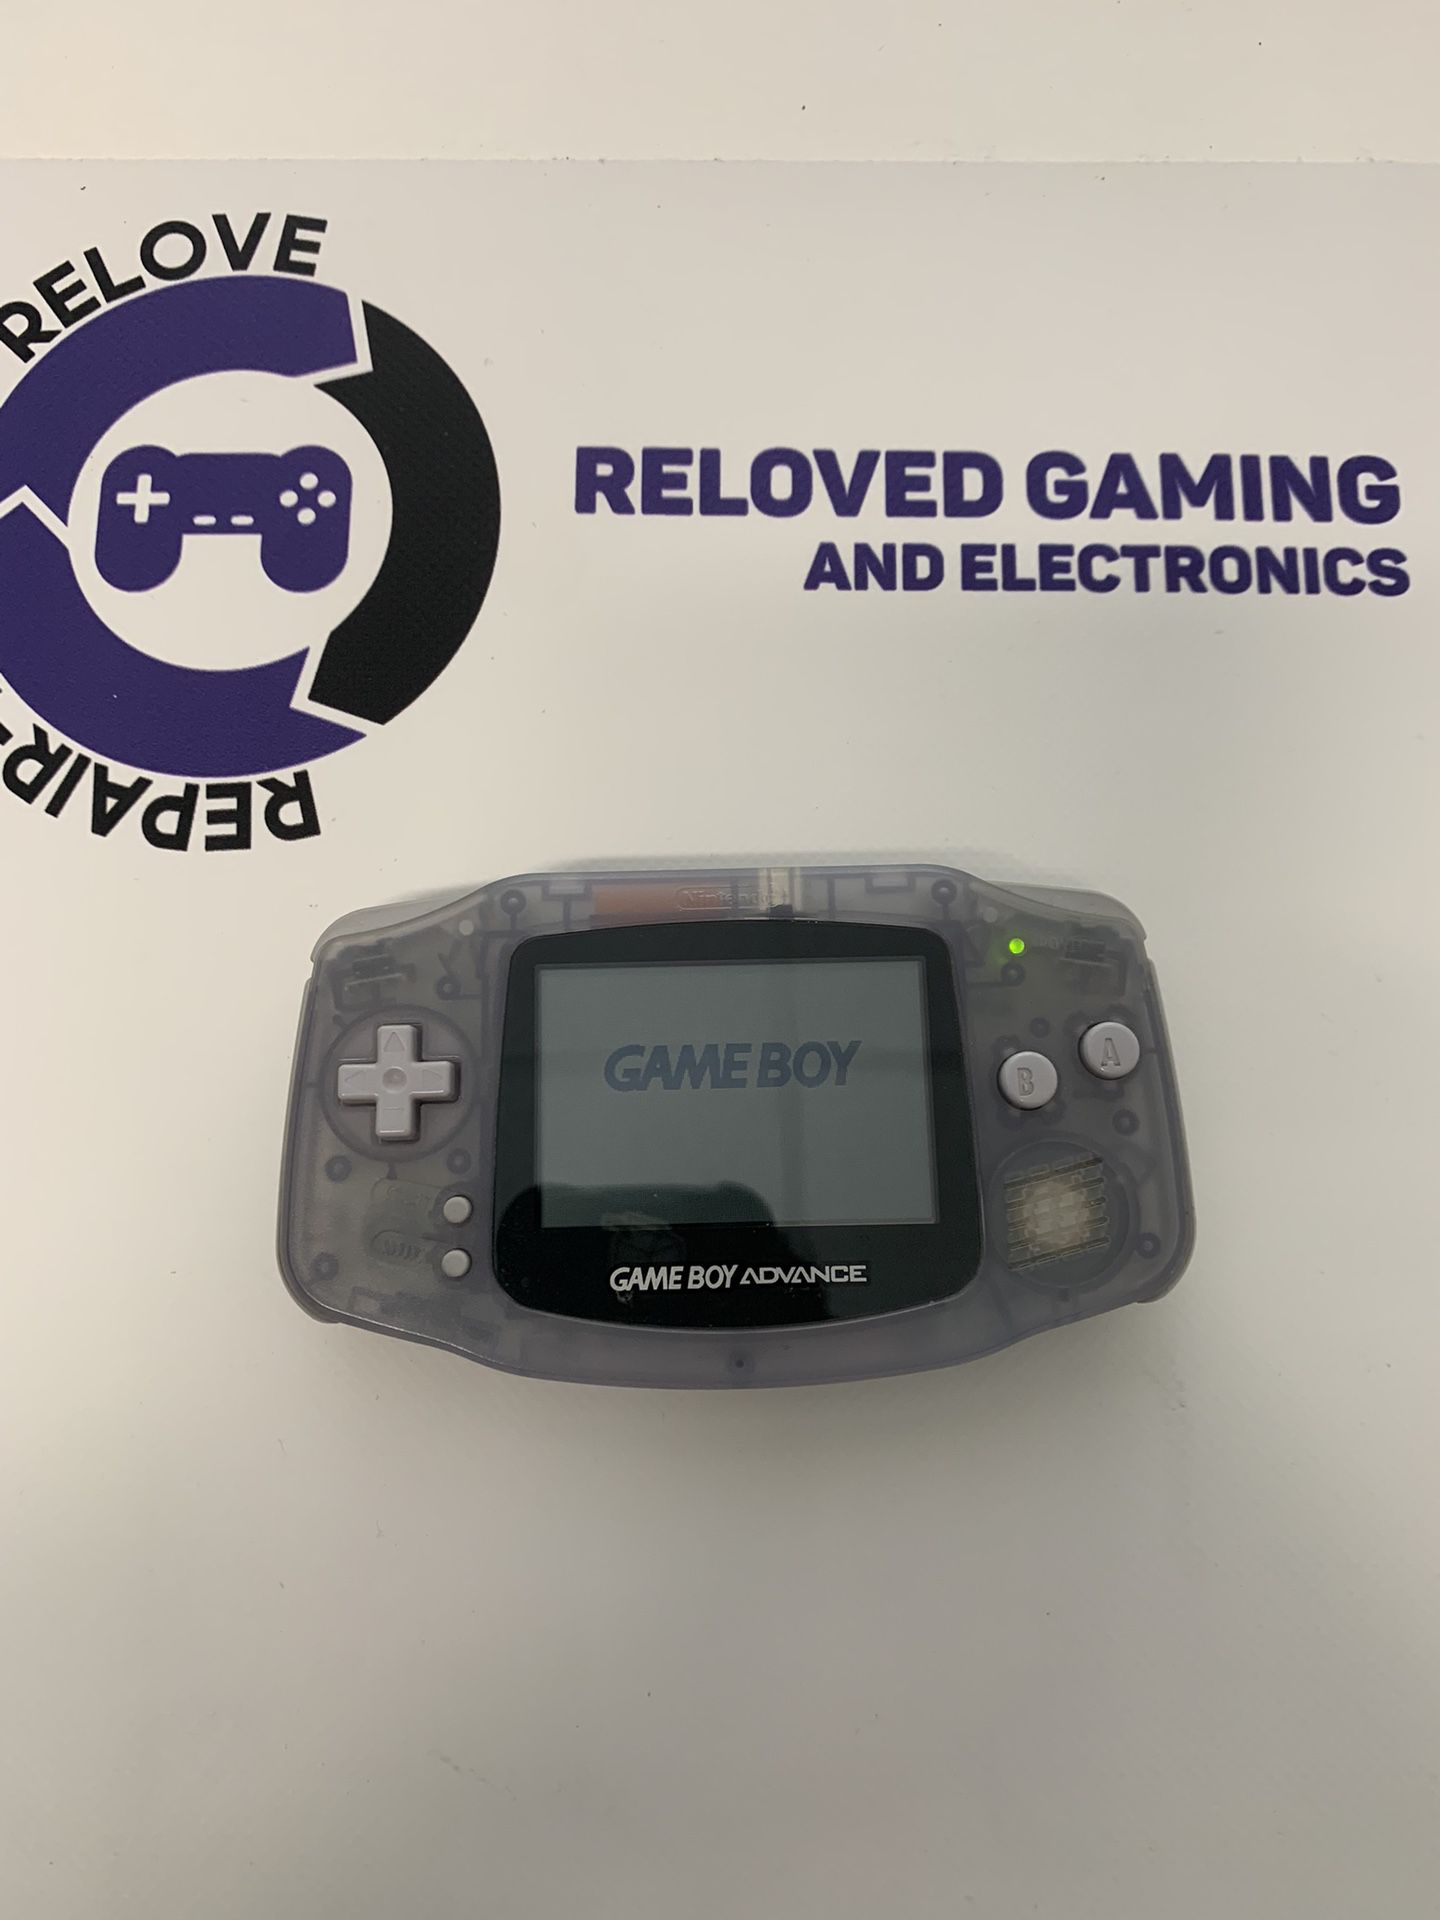 Gameboy Advanced - In Immaculate Condition - No Issues